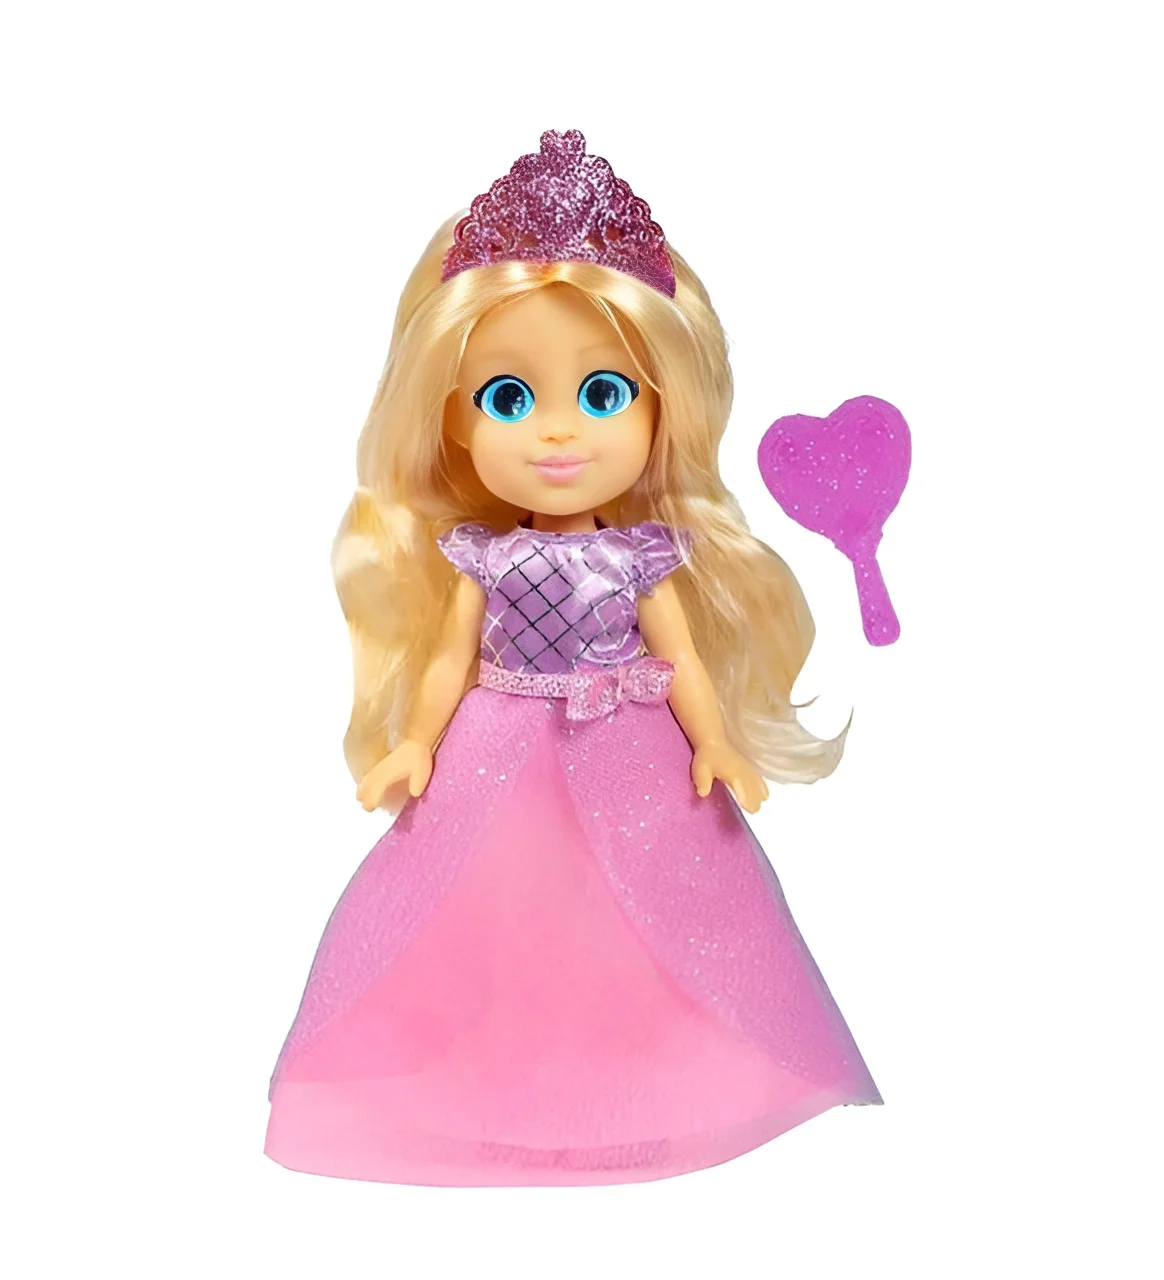 Love Diana Cloth Doll 15 Cm Toy Children Toy Mom & Kids Profession Groups Doctor Princess And Birthday Baby Fun Game